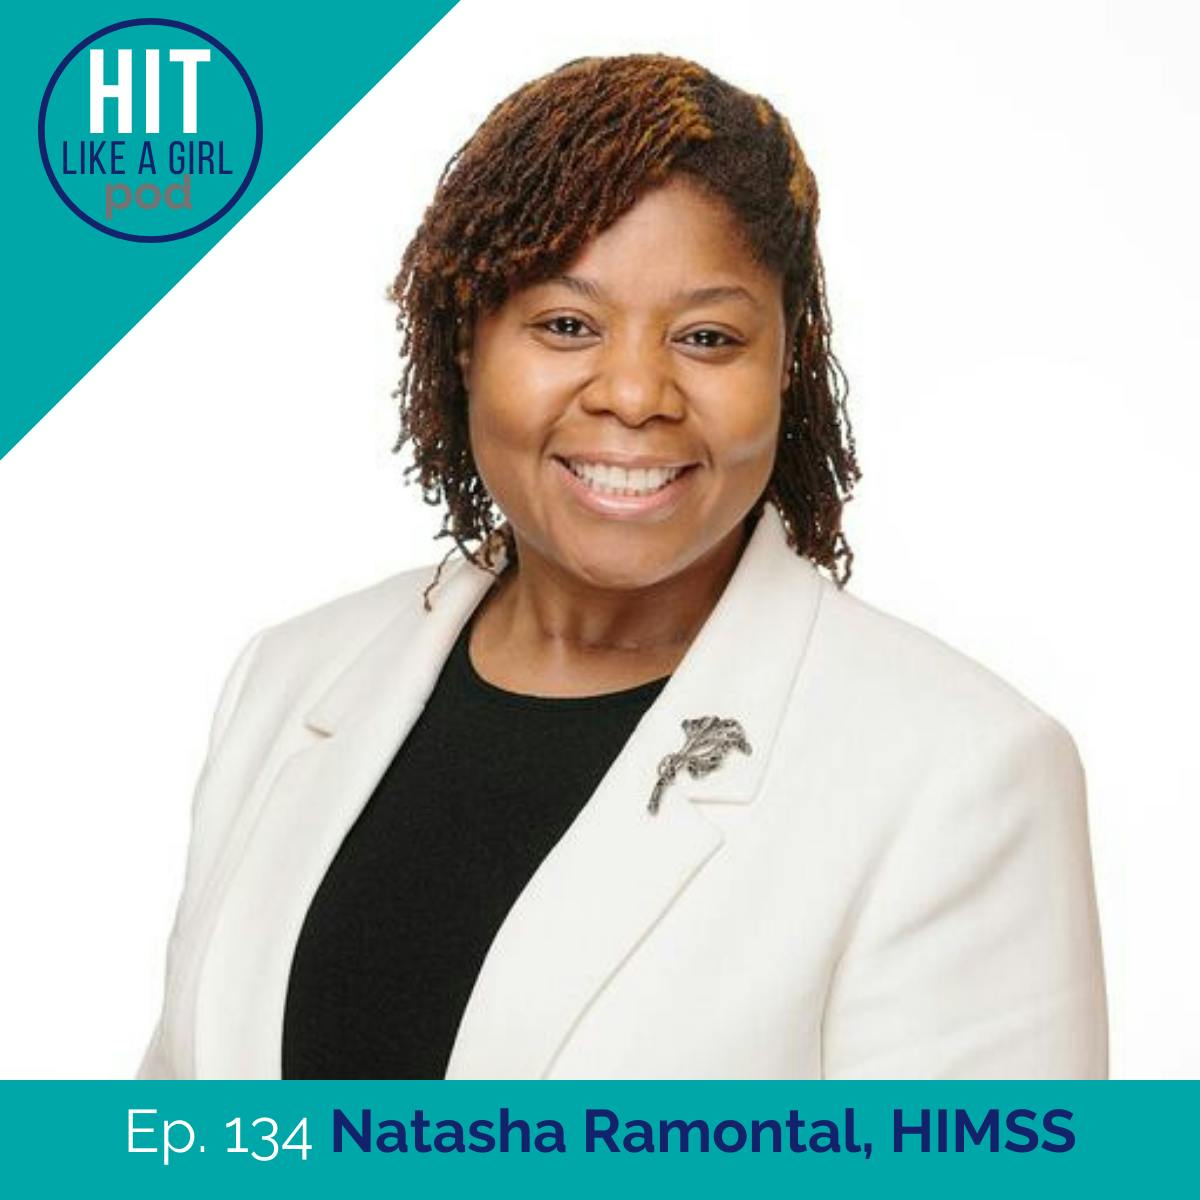 Dr. Natasha Ramontal, of HIMSS, Shares Her Passion for Making a Global Impact